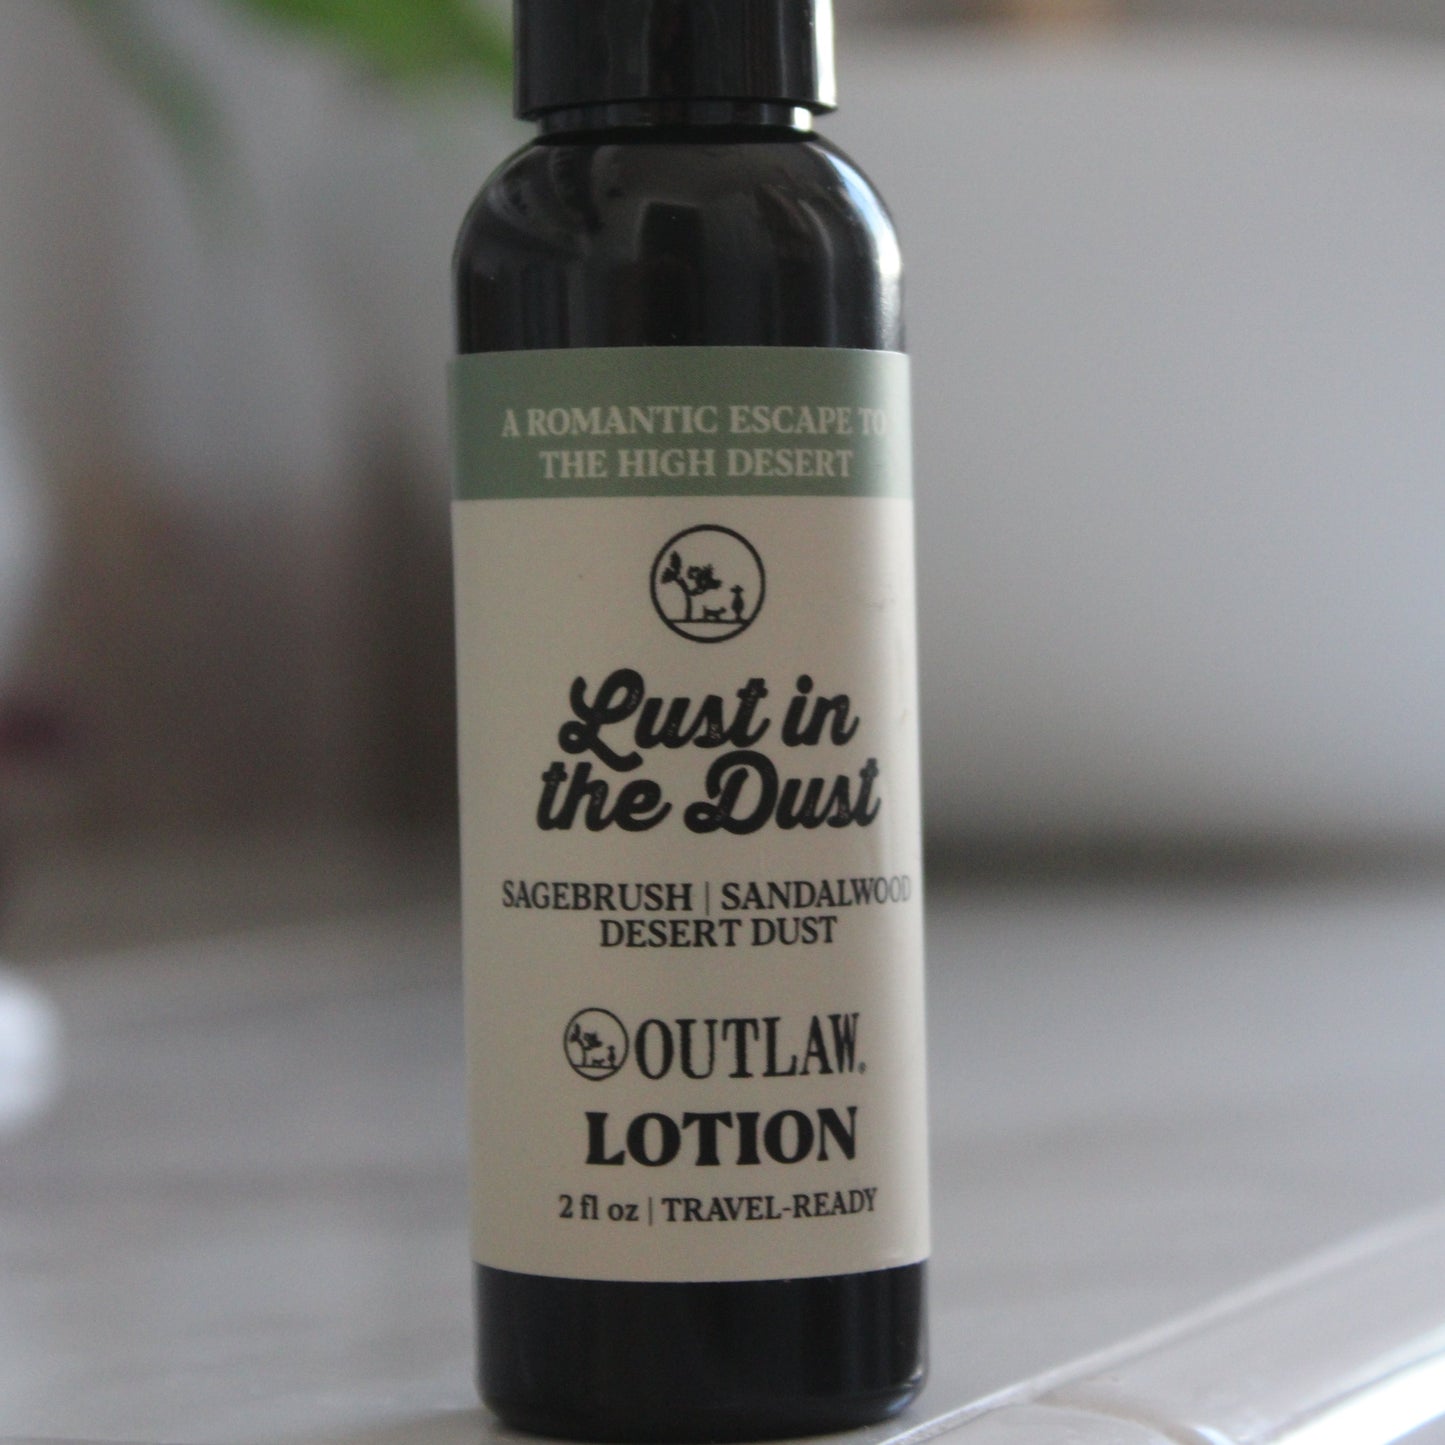 Lust in the Dust Natural Travel Size Lotion